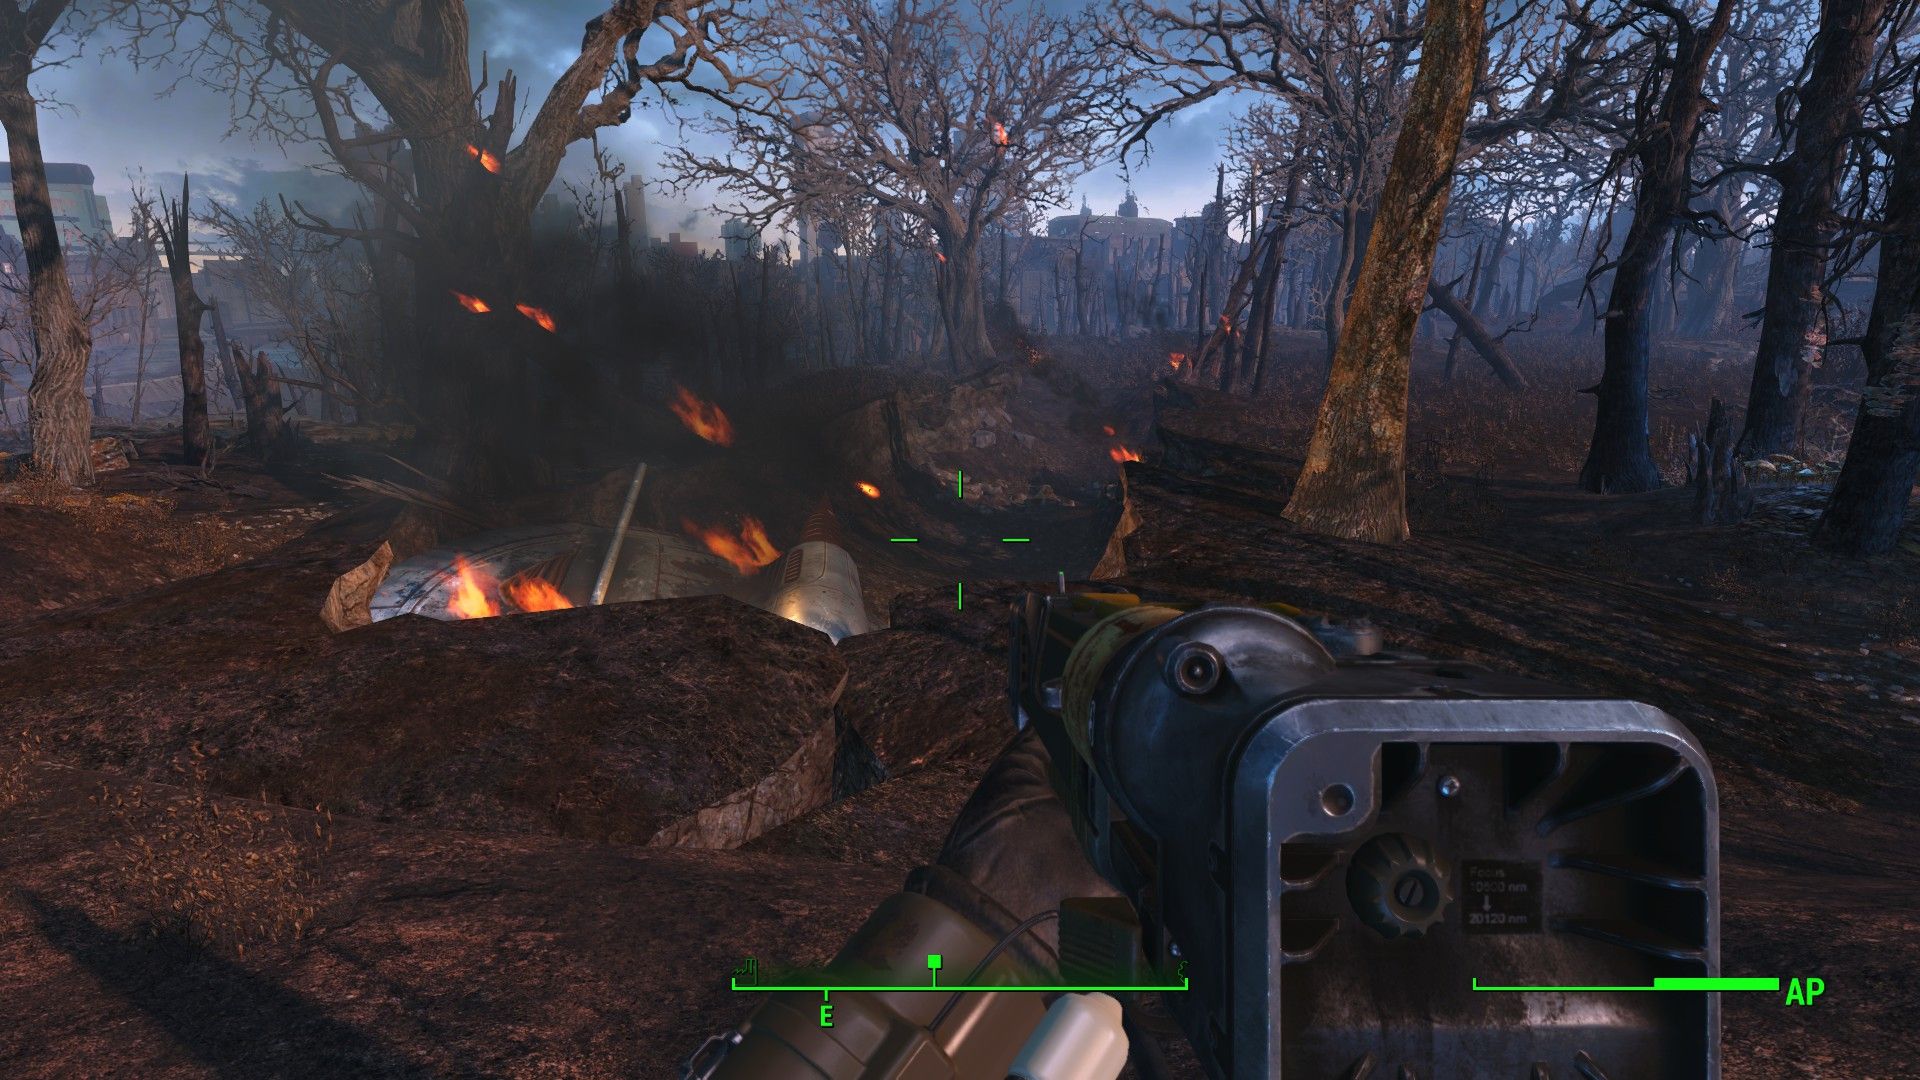 The Crashed UFO in Fallout 4